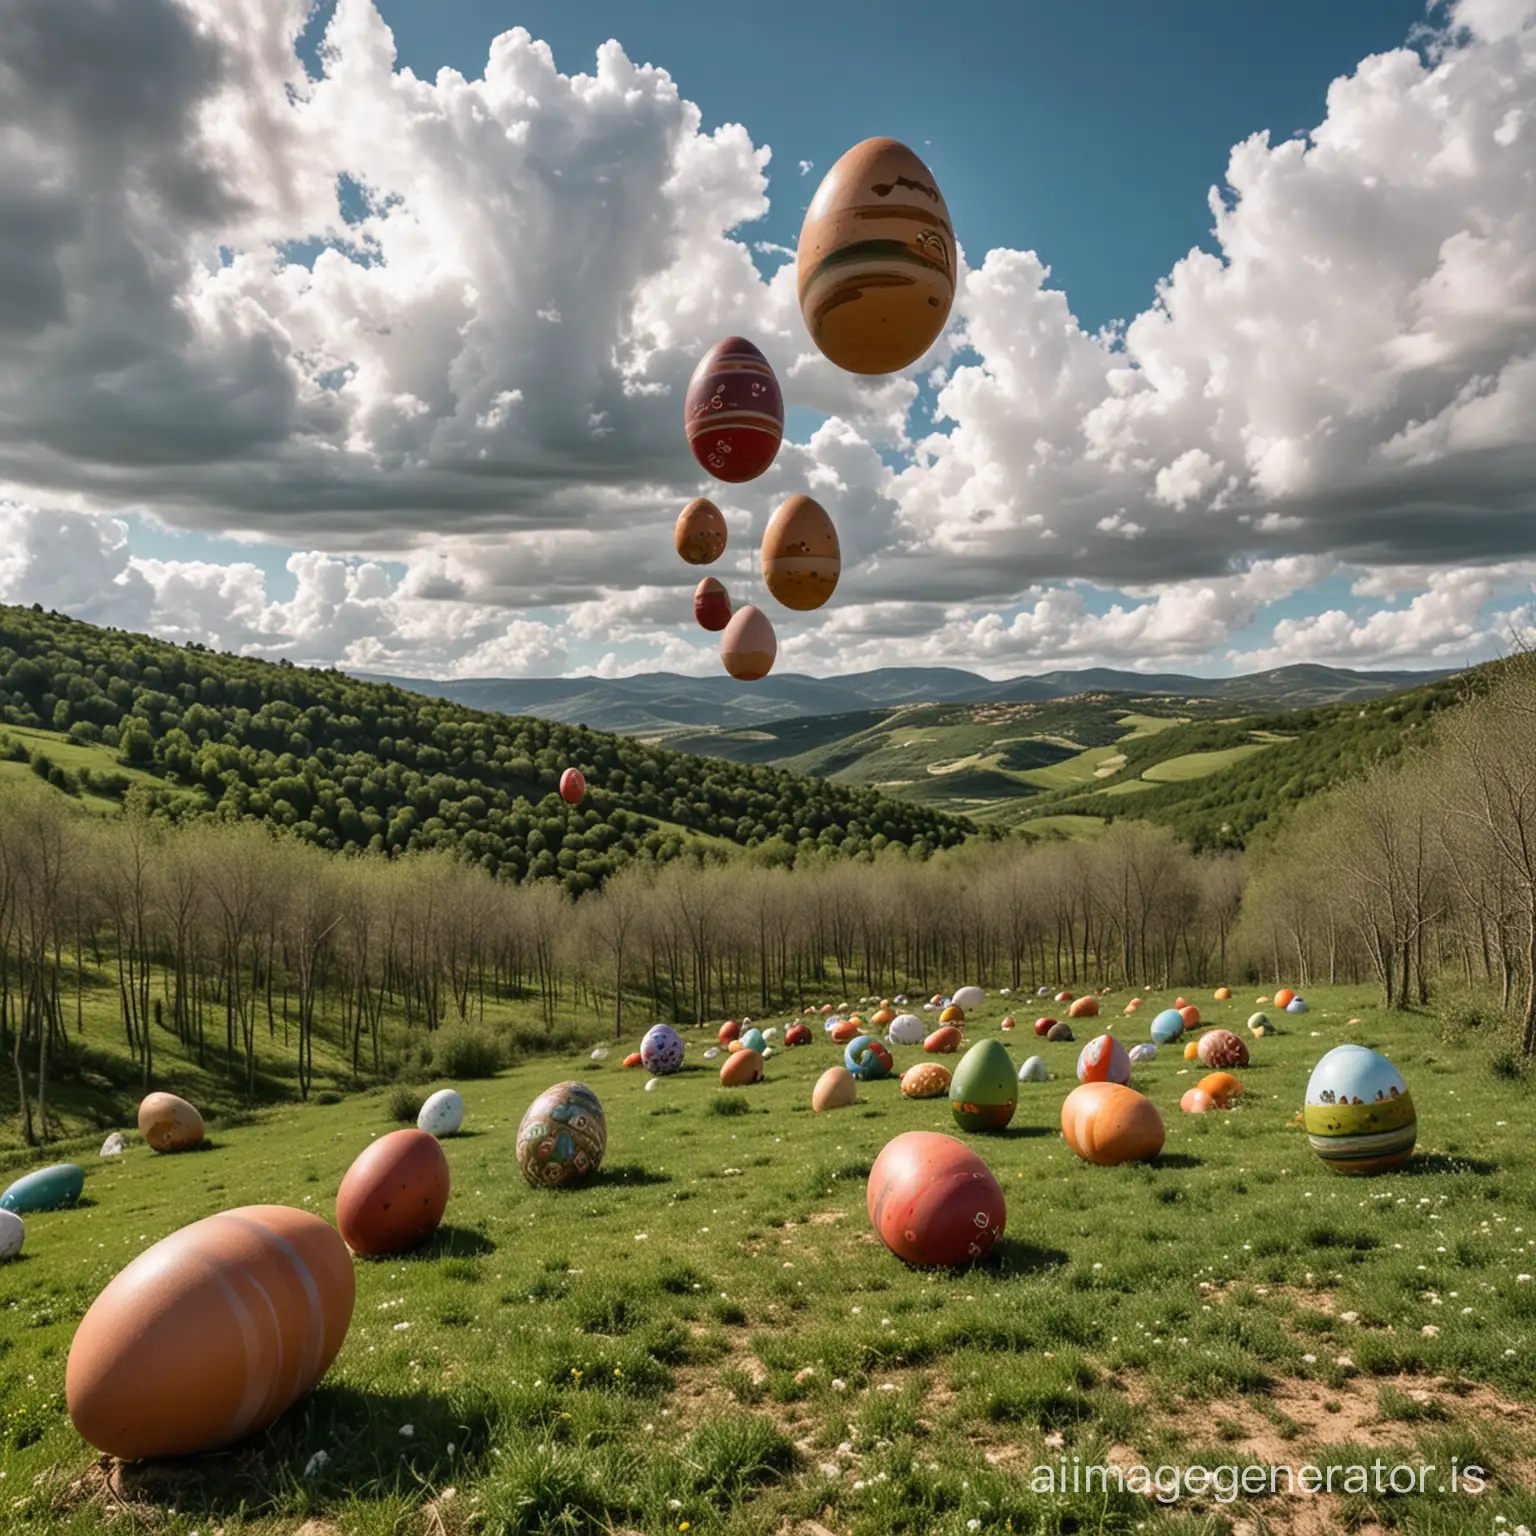 Giant Easter eggs of various sizes and materials flying randomly in the sky. The sky is full of clouds. On the ground, a forest with green countryside in Abruzzo.